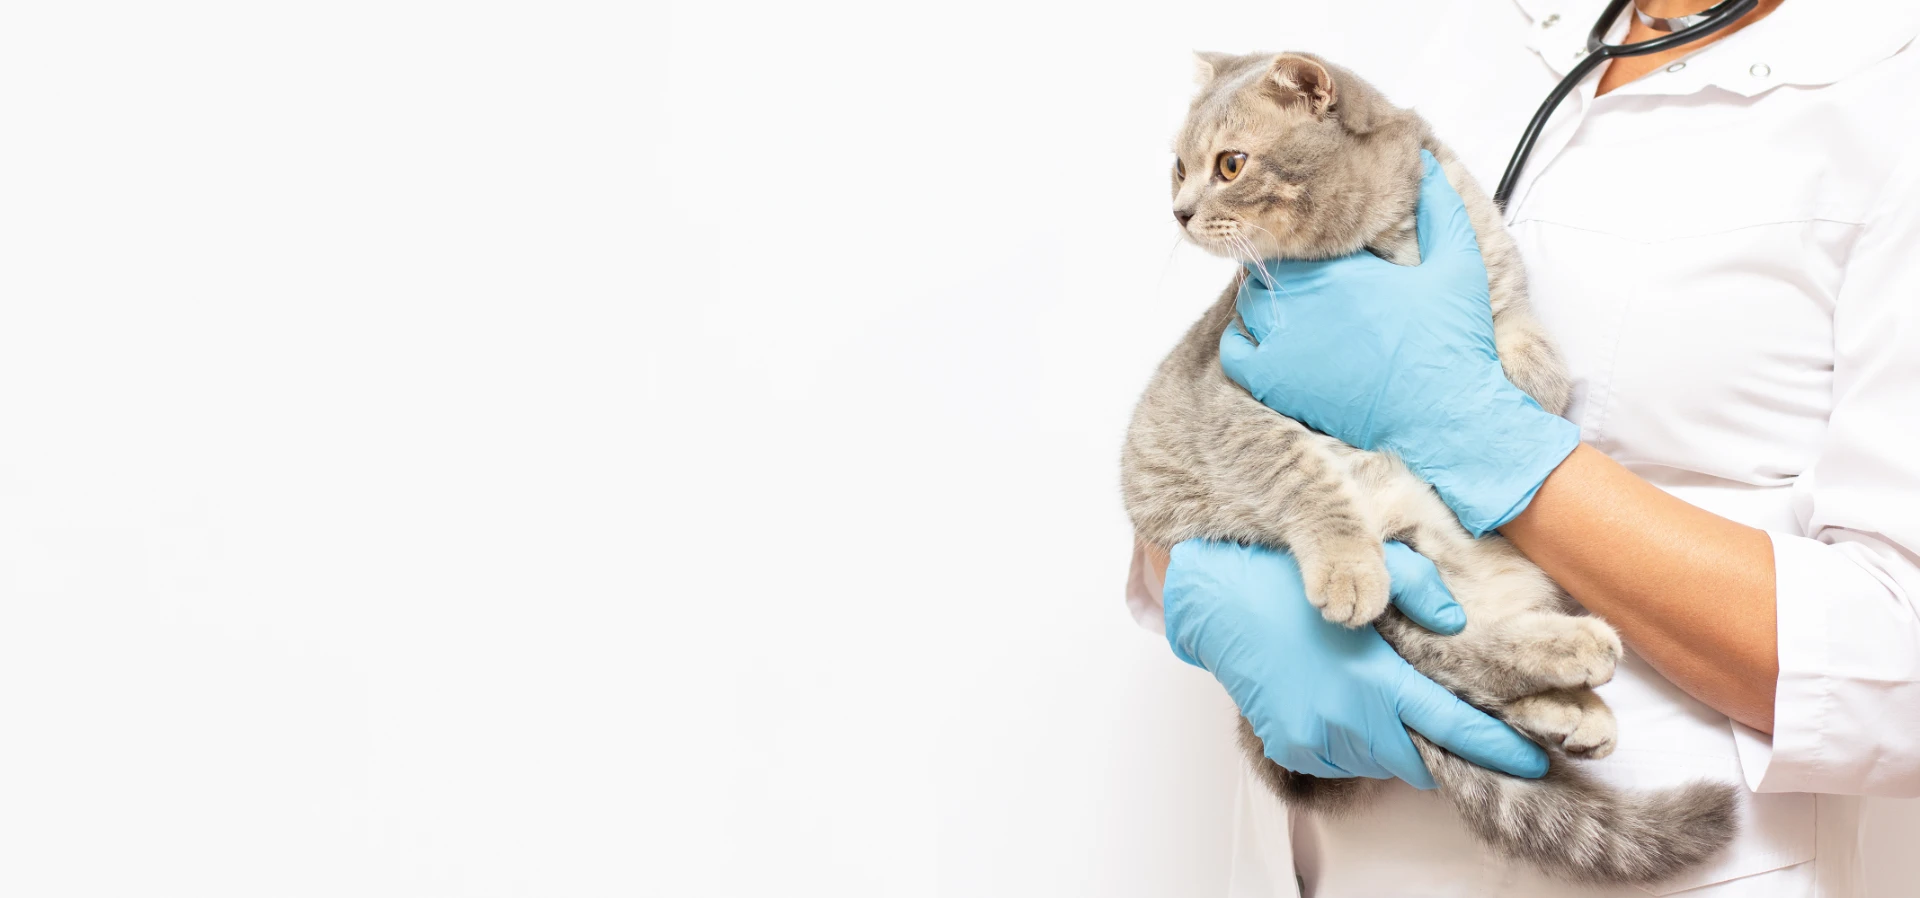 A background image showing a cat being held by a female veterinarian.